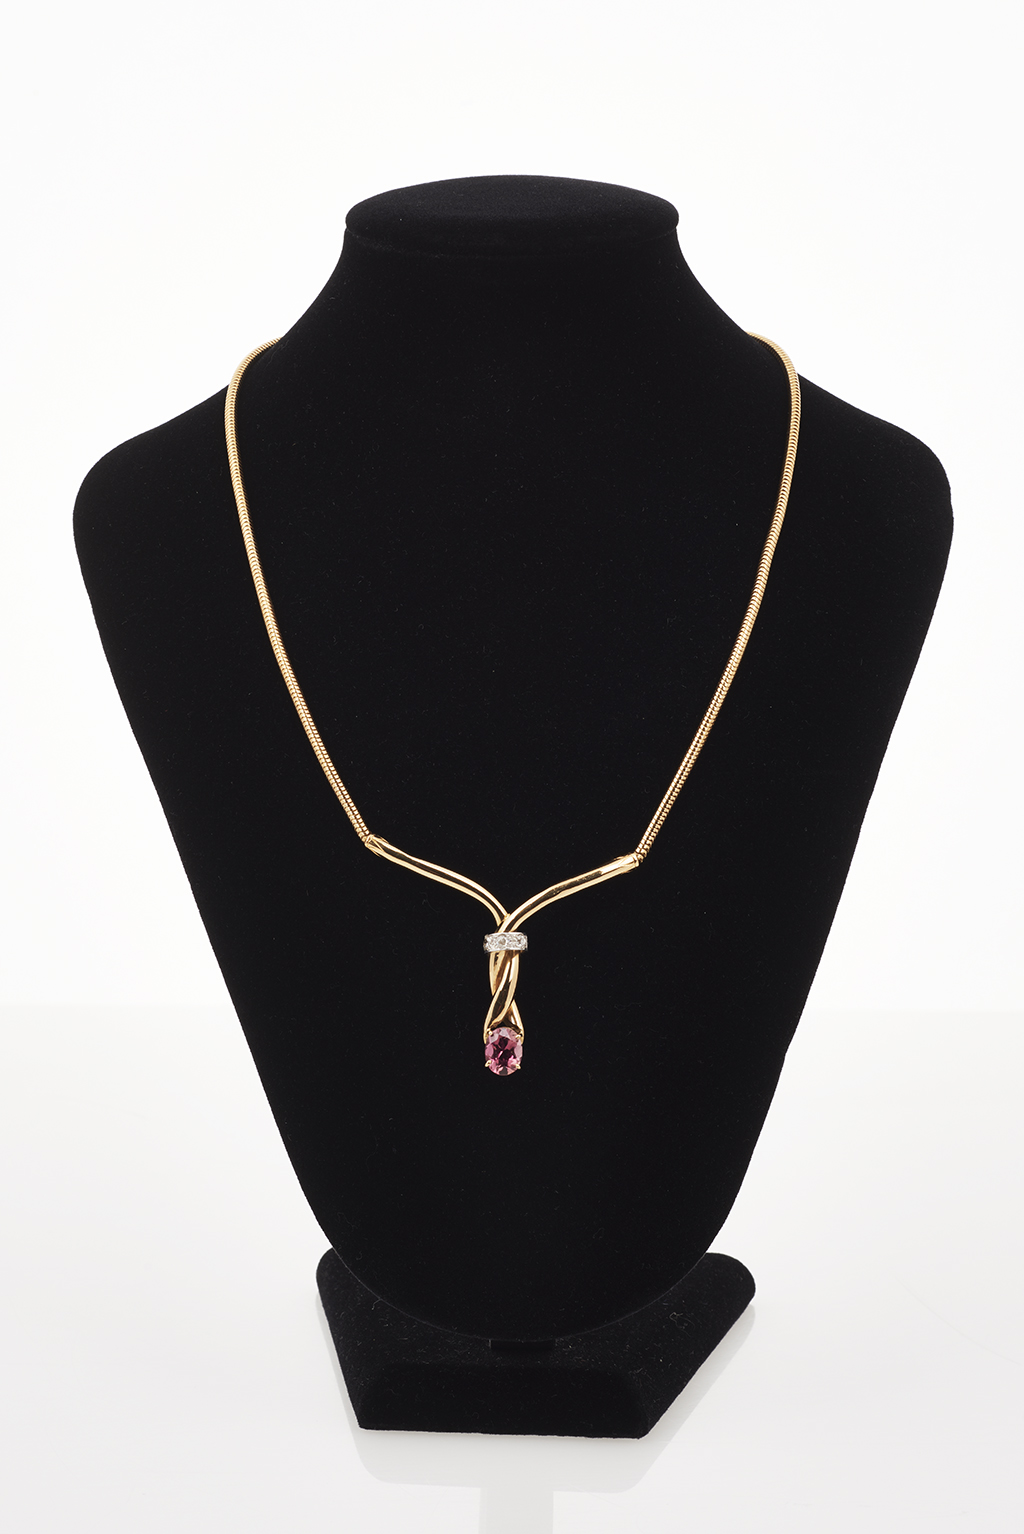 Retro Gold and Pink Tourmaline and Diamond necklace - Shapiro Auctioneers